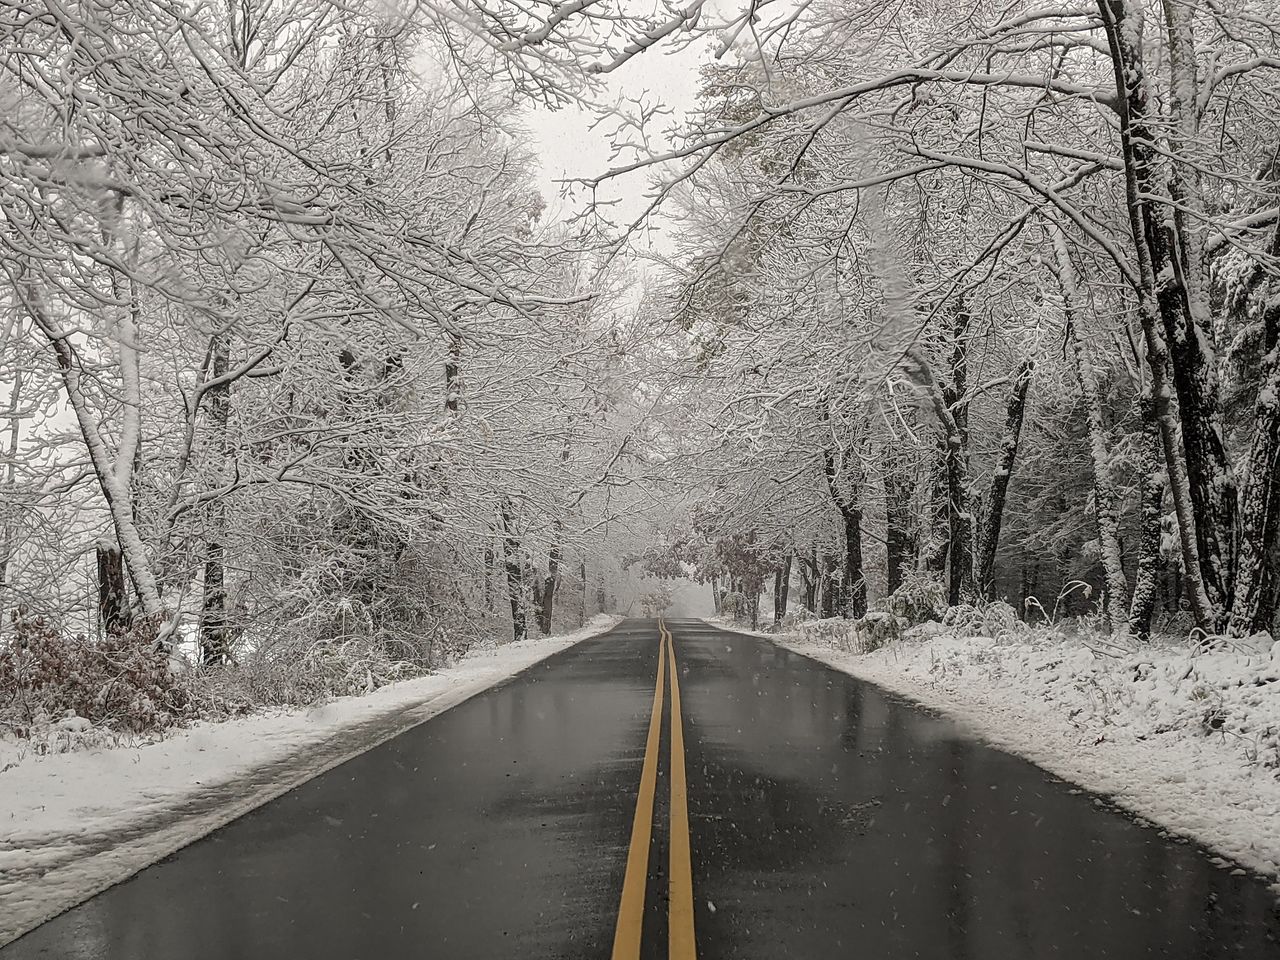 SNOW COVERED ROAD AMIDST TREES